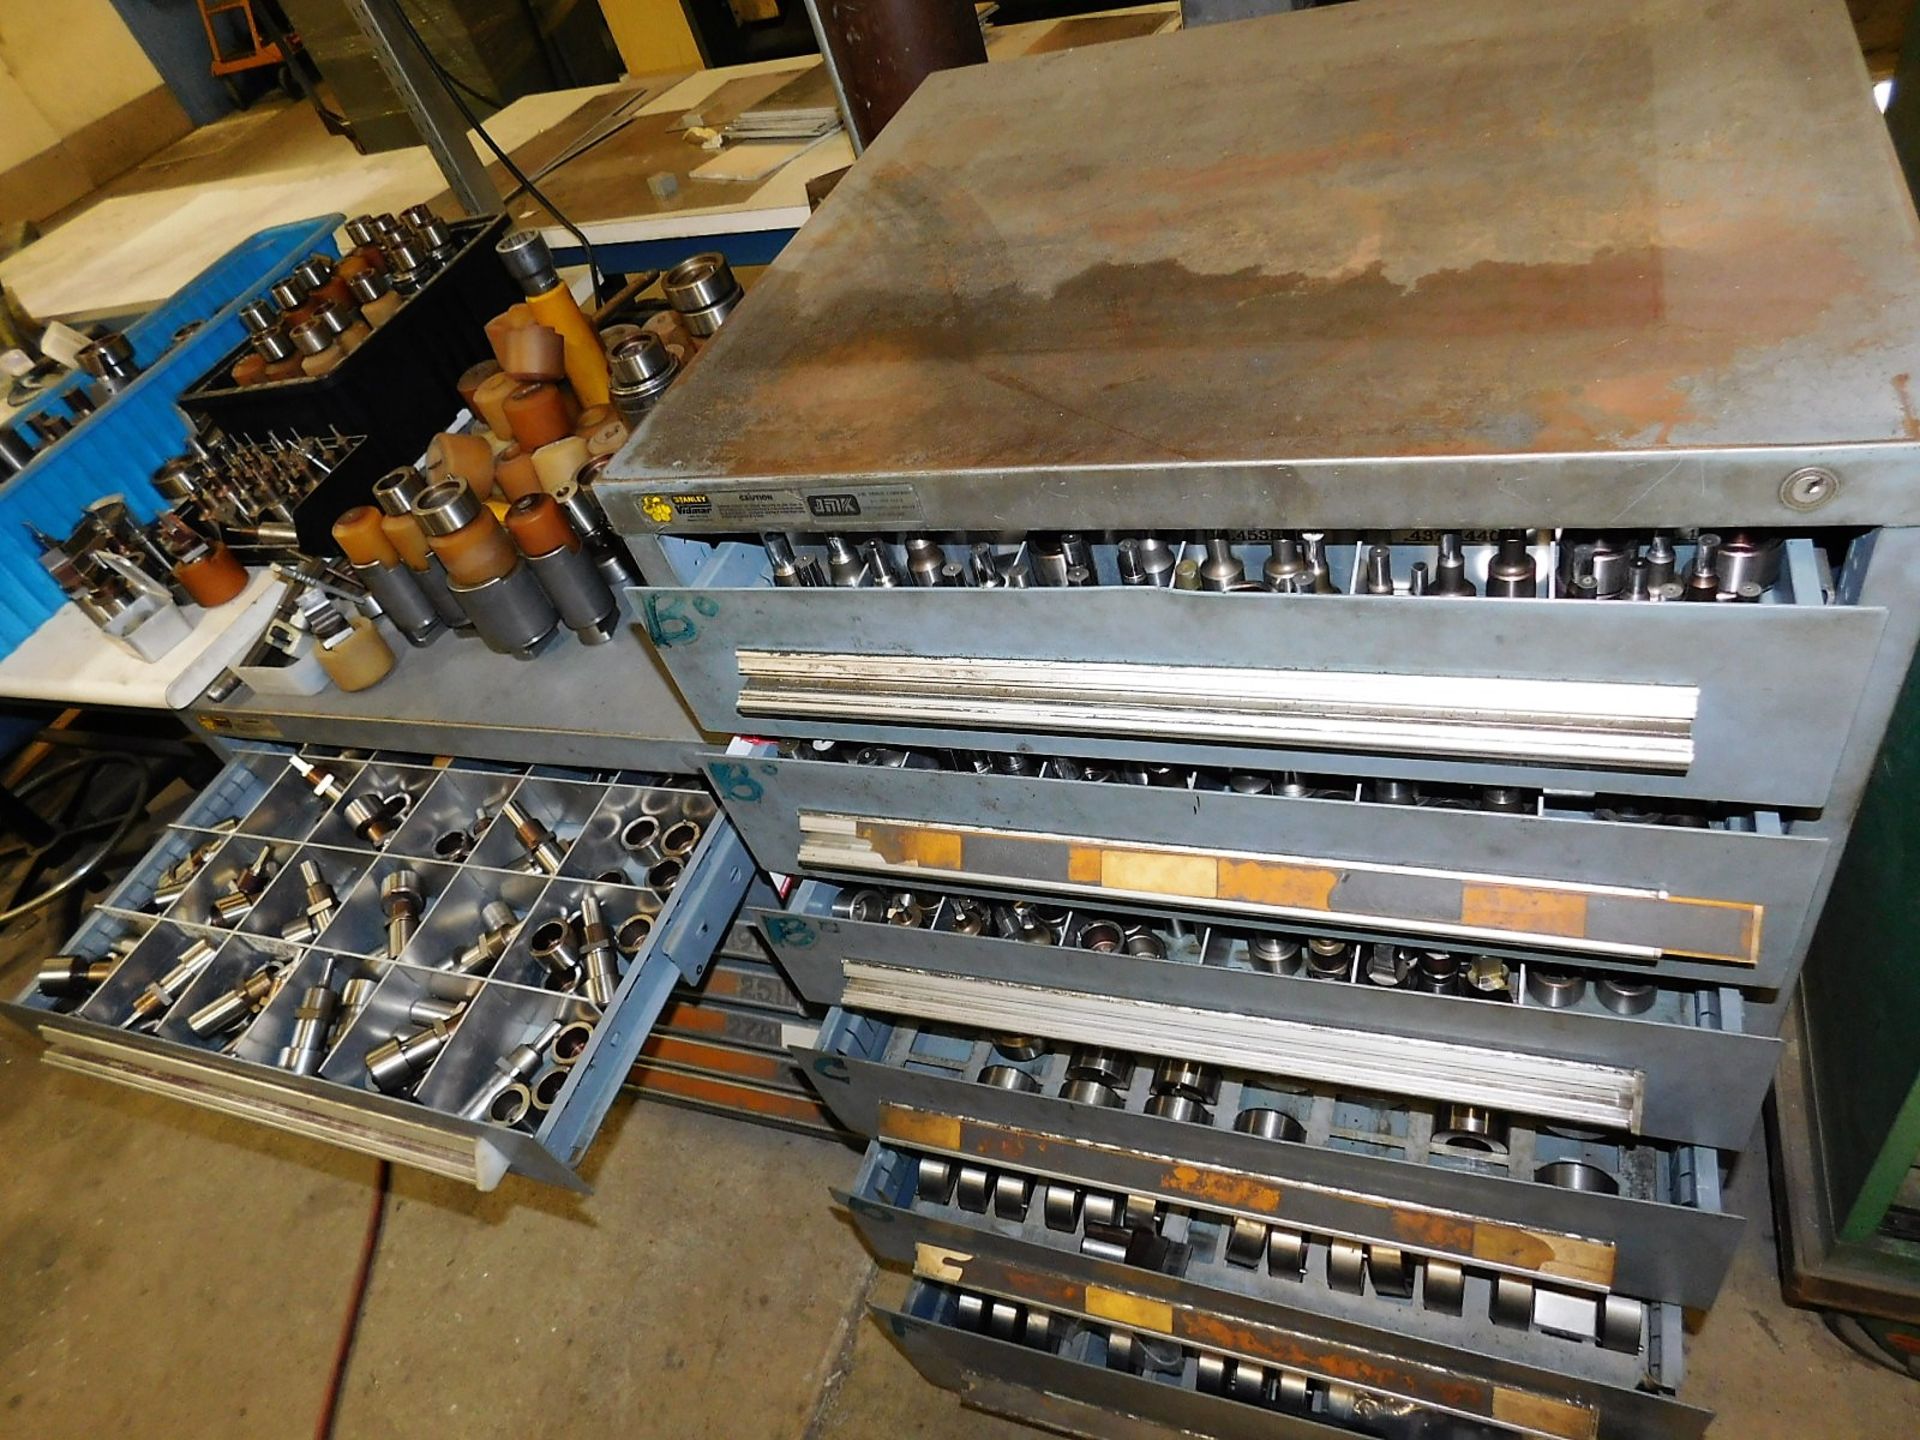 LOT - (2) CABINETS W/ CONTENTS INSIDE & ON TOP OF TOOLING FOR THE WIEDEMANN CENTRUM C-1000